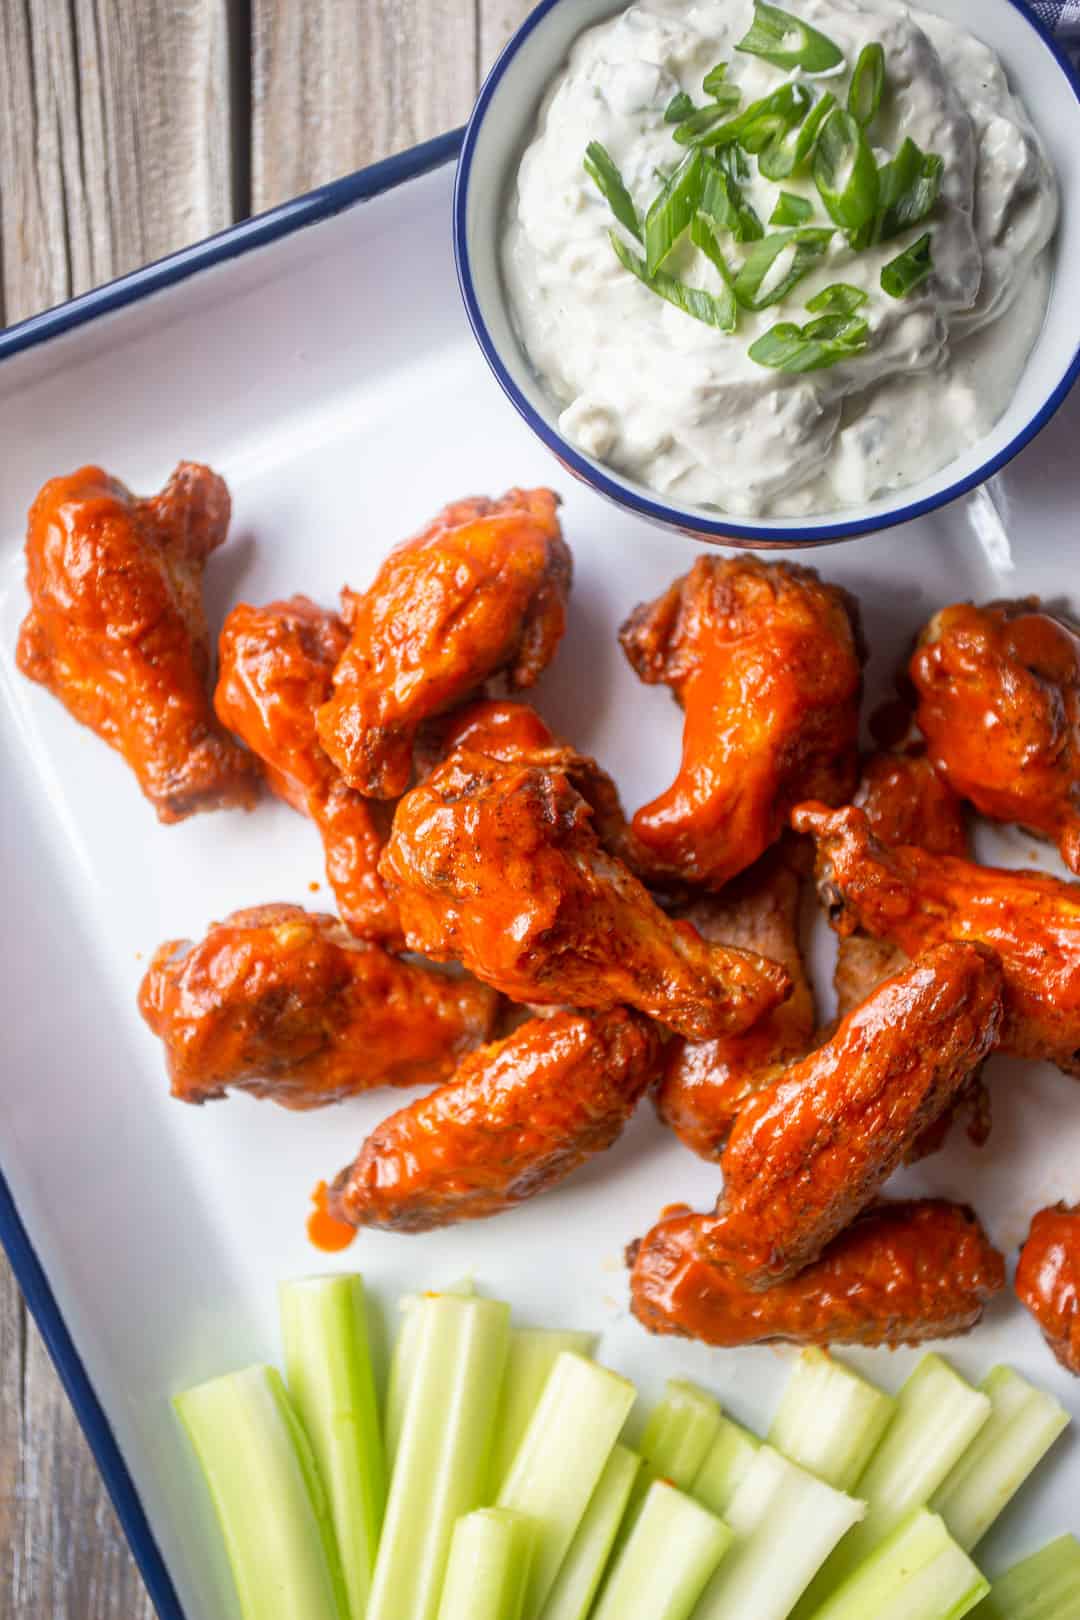 Chicken wings recipe prepared buffalo style, with blue cheese and celery.